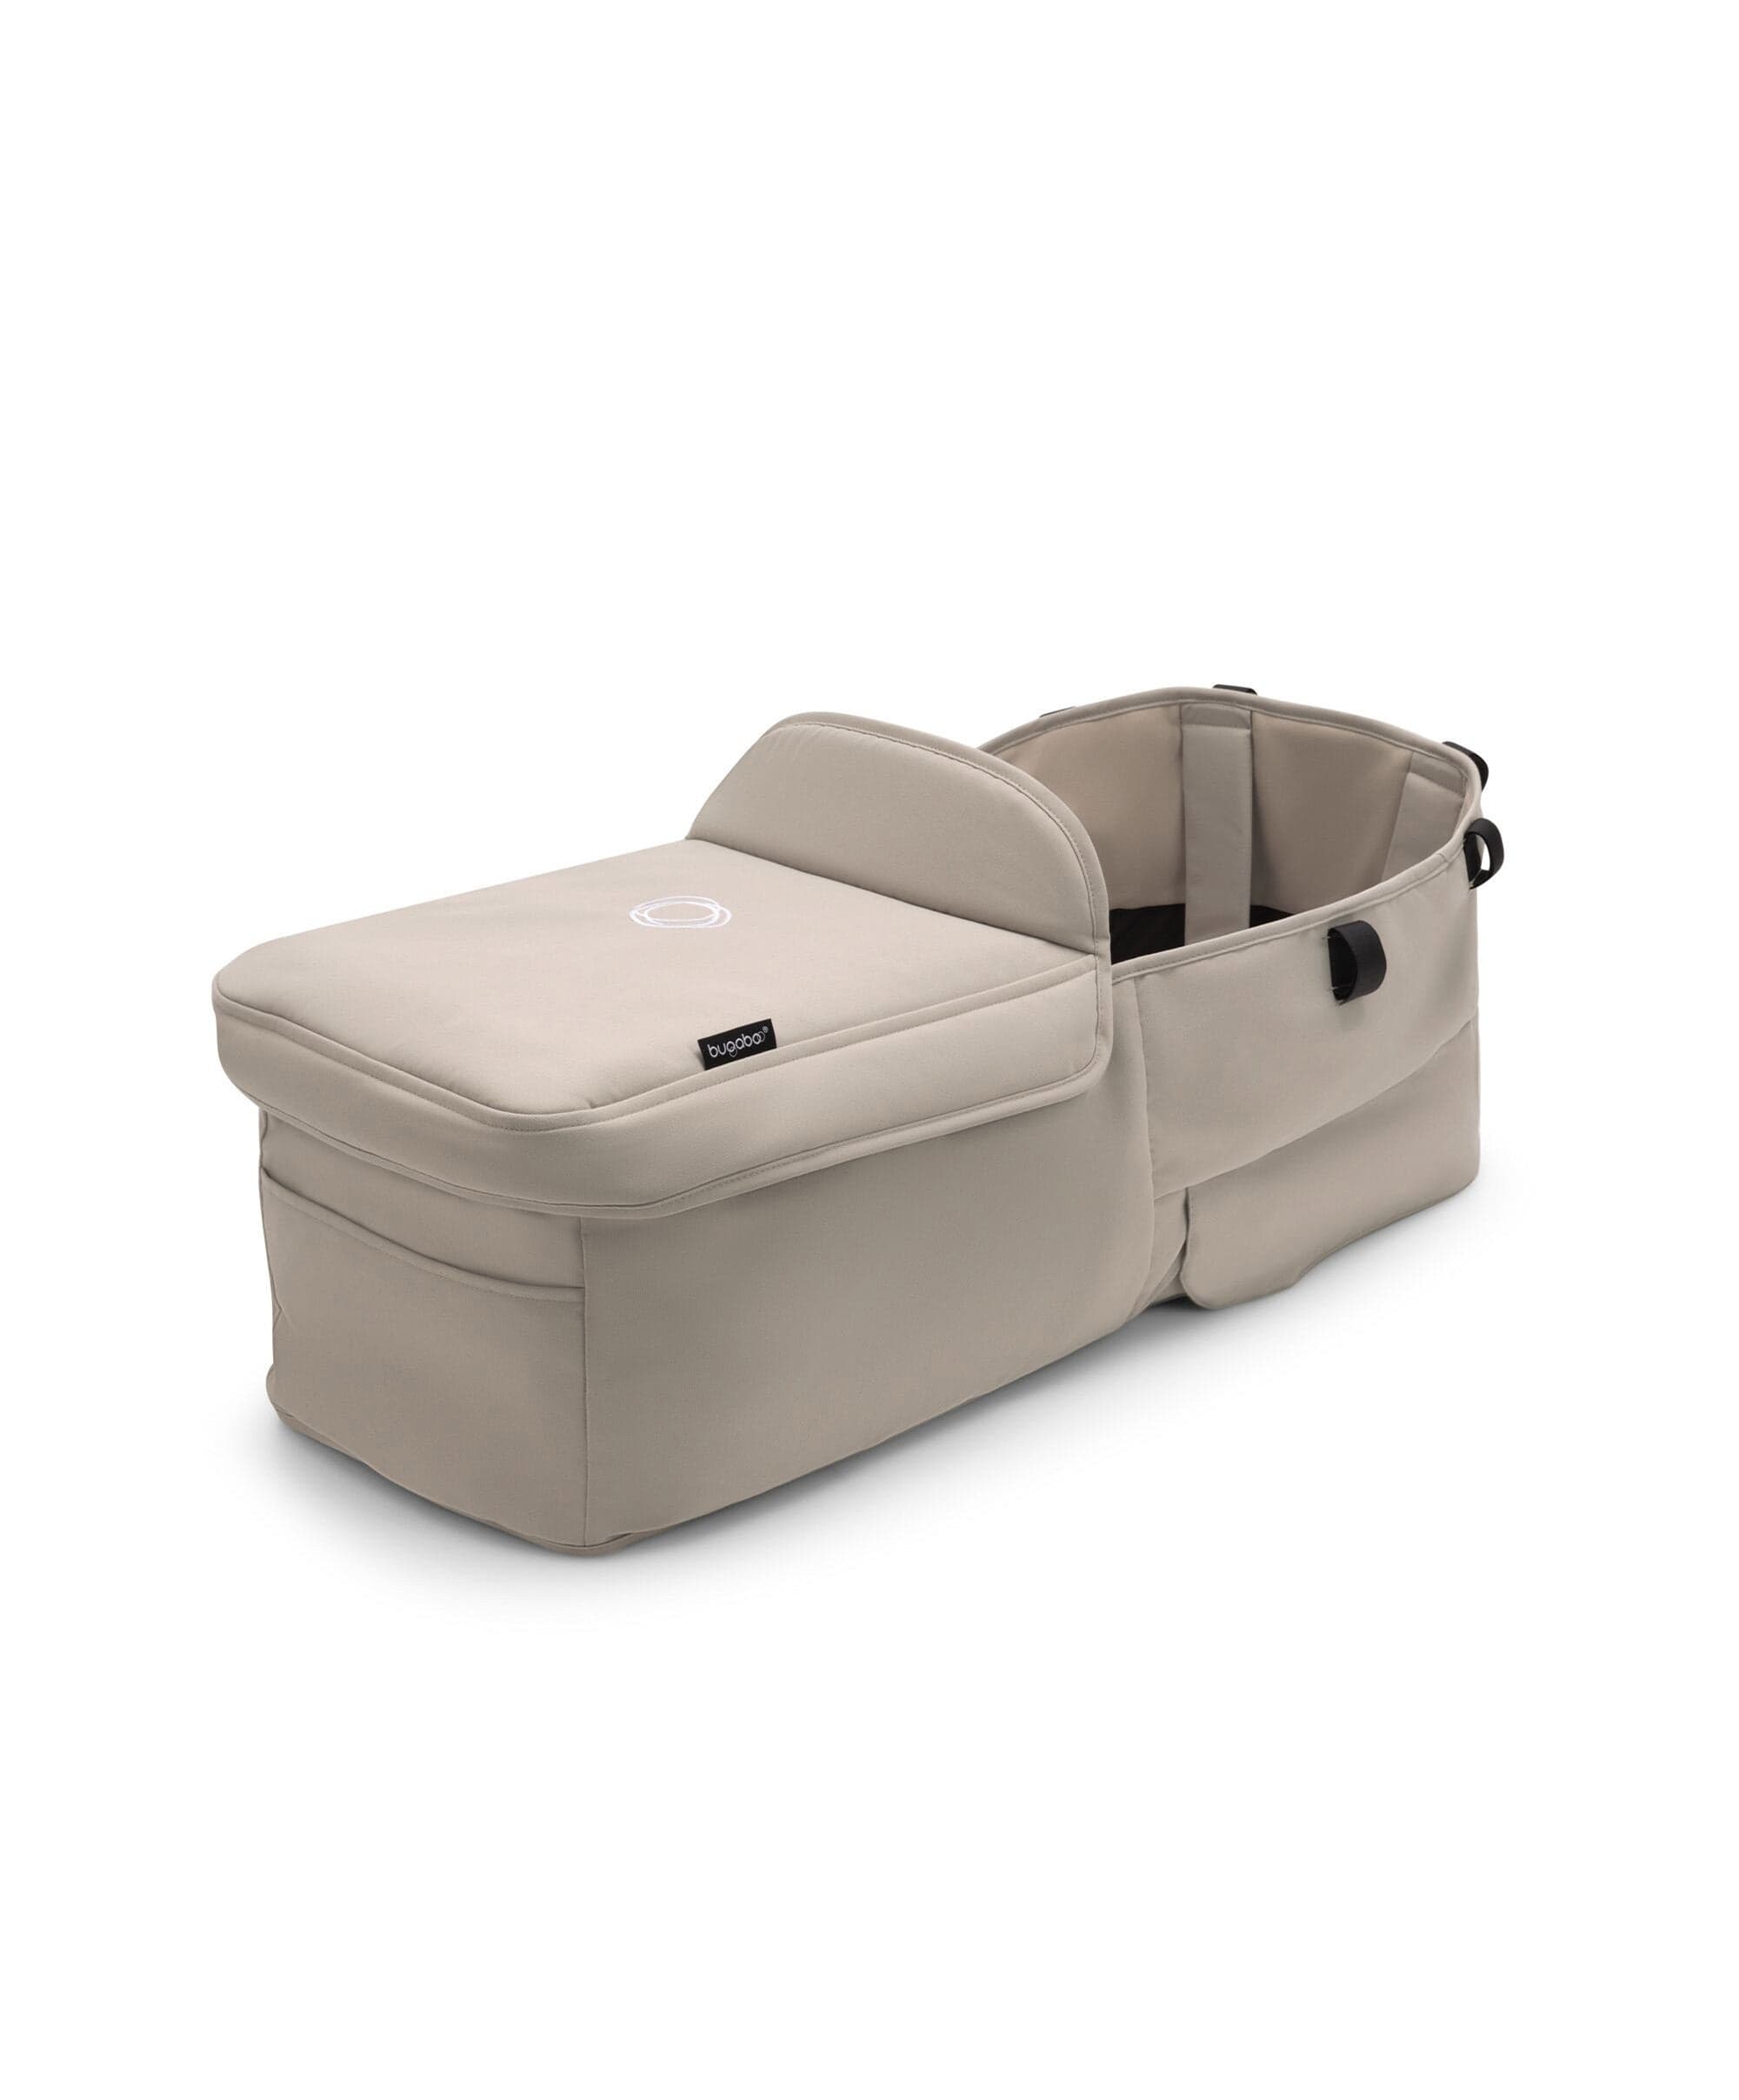 Bugaboo Donkey 5 Carrycot Fabric Complete - Desert Taupe